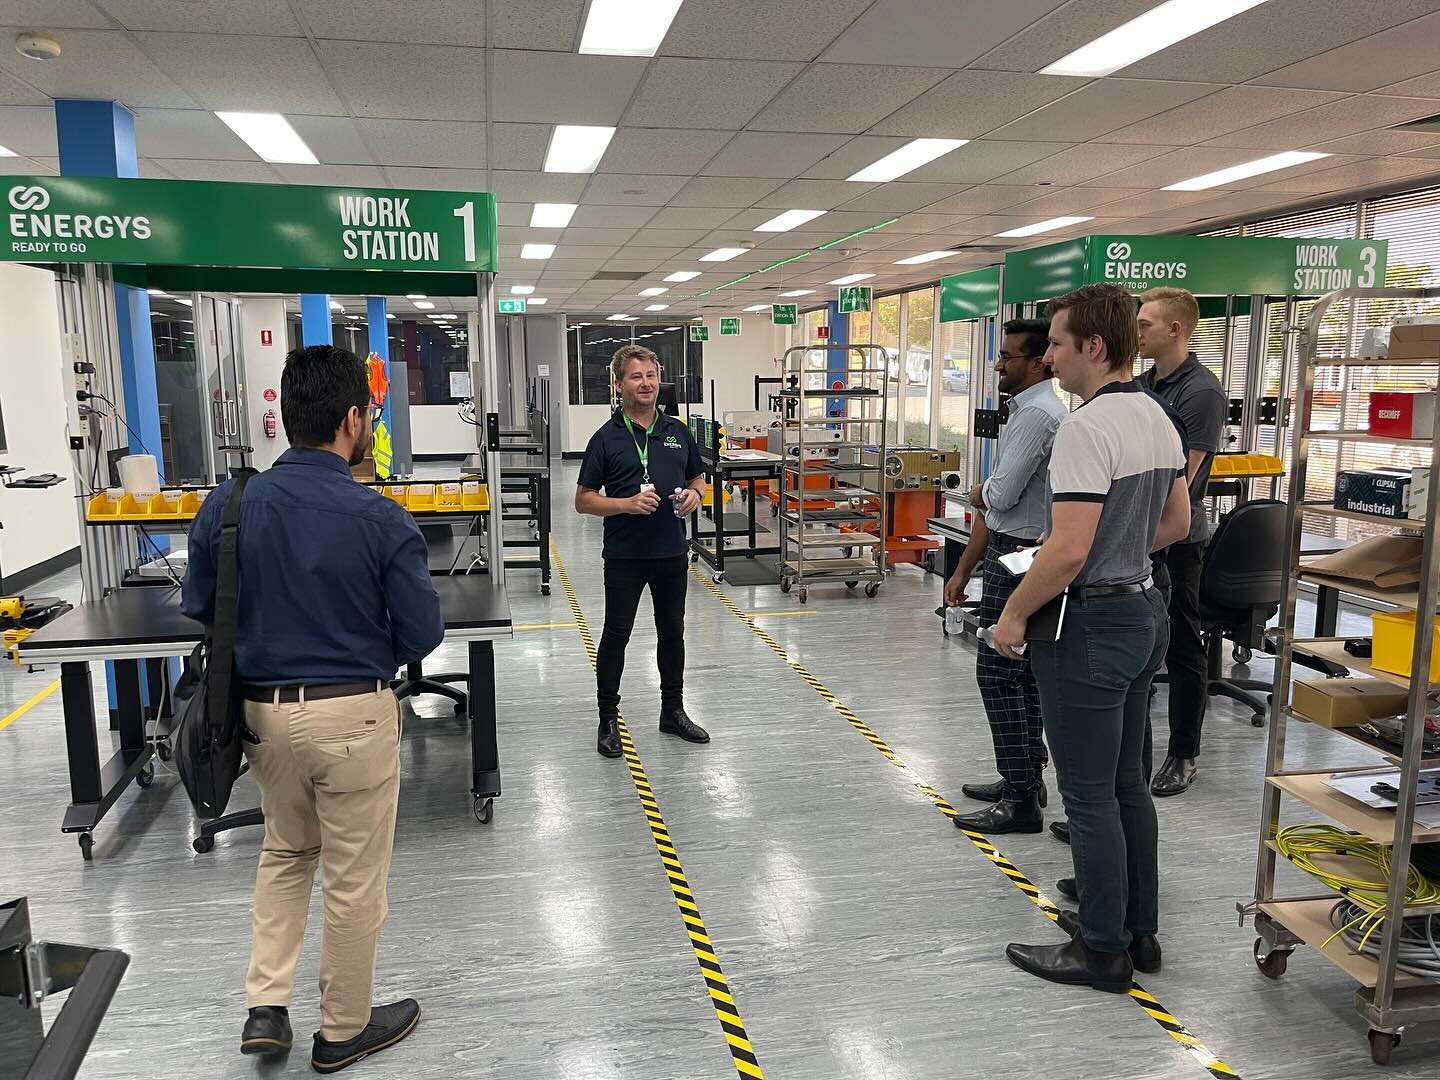 This is what OH&amp;S excellence looks like with the AeroSMART Industrial, our ergonomic, electric, height-adjustable workstation designed for industrial environments. Energys Australia has implemented the solution in their operations, championing th